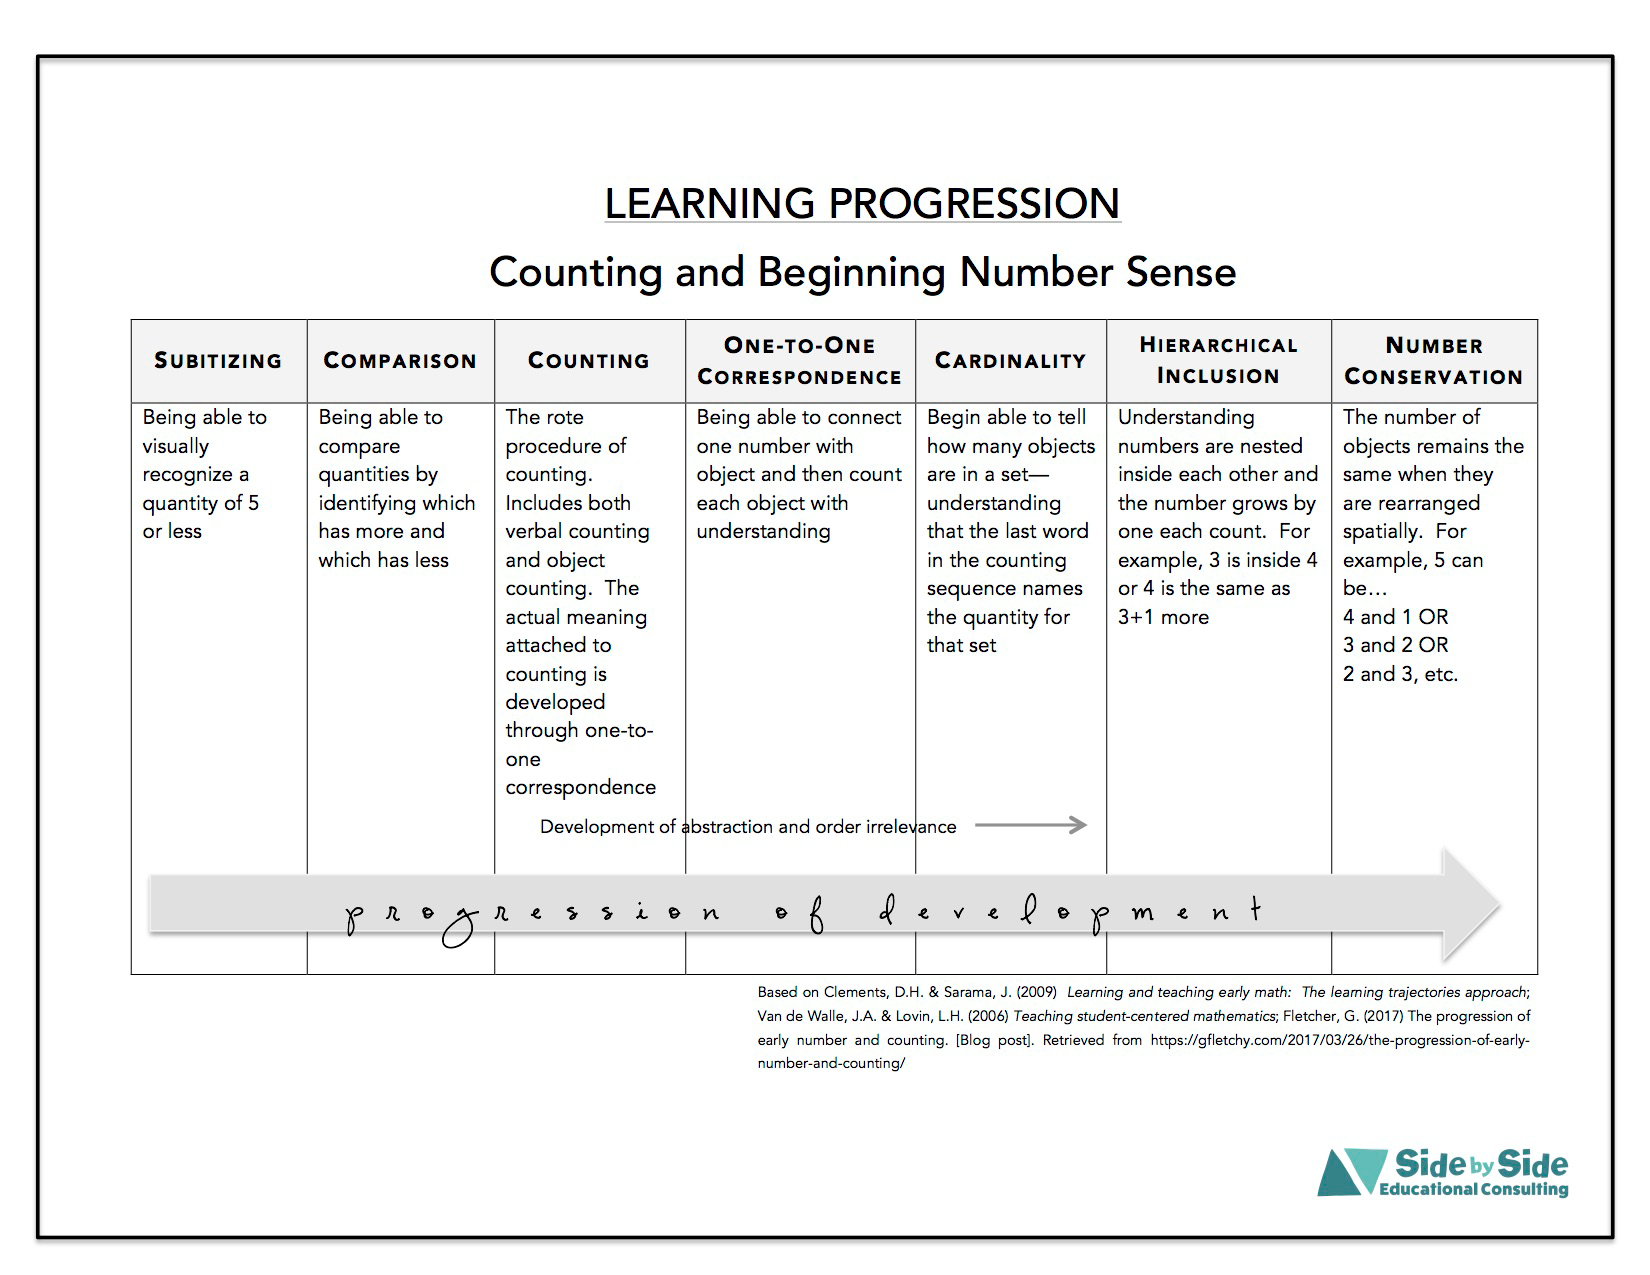 learning-progression-for-counting-and-beginning-number-sense-side-by